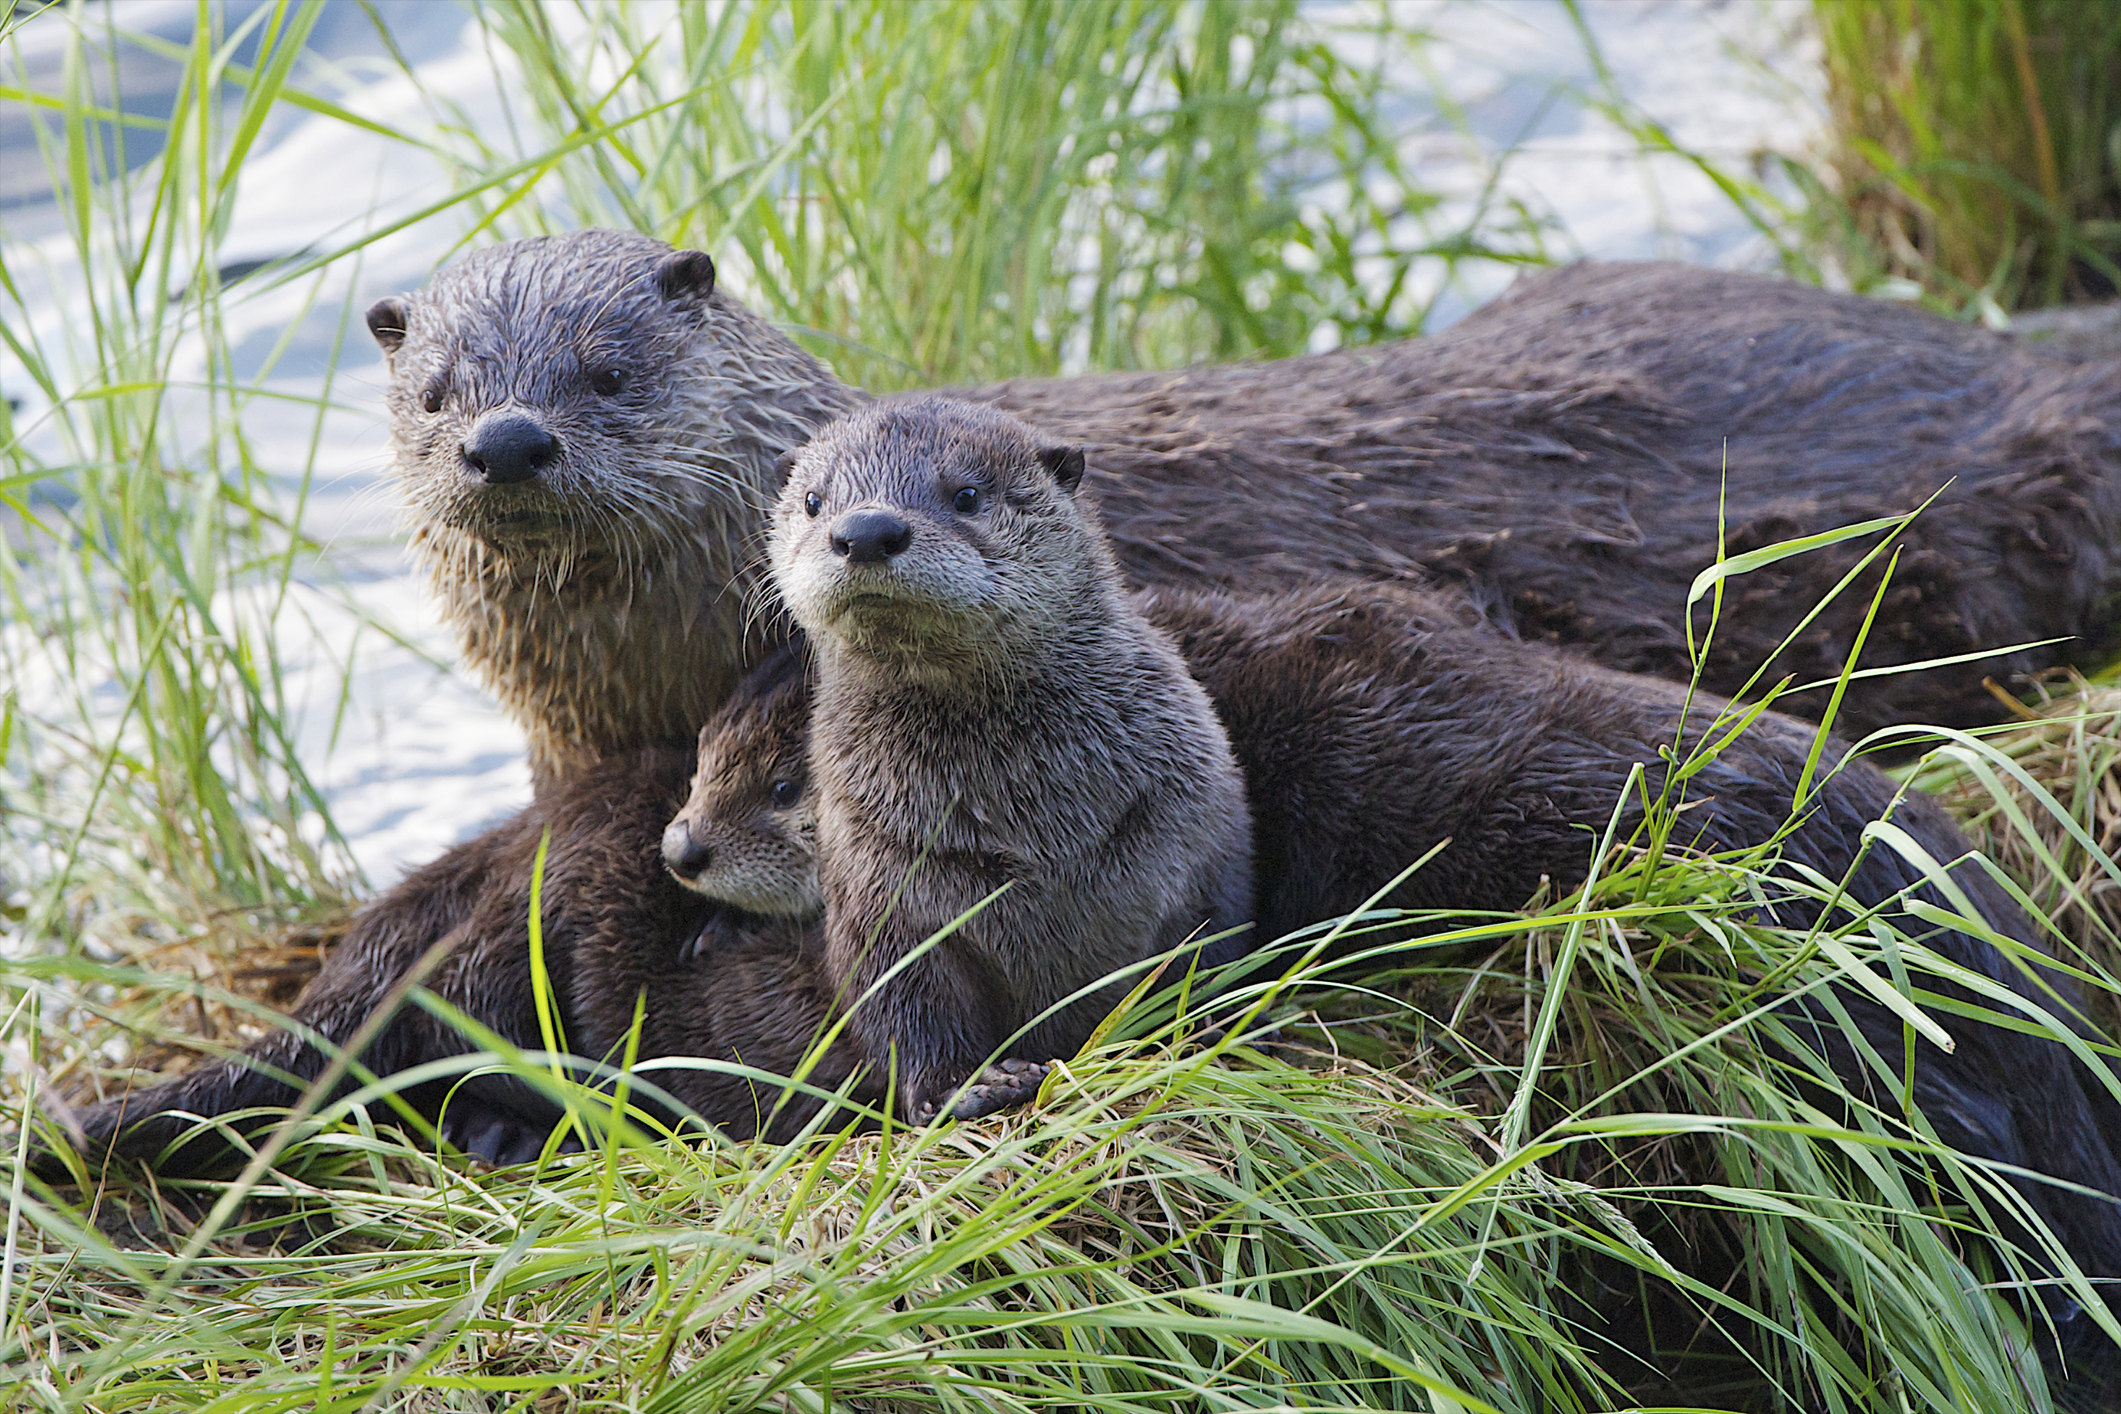 River otters in Yellowstone | Photo by Barrett Hedges